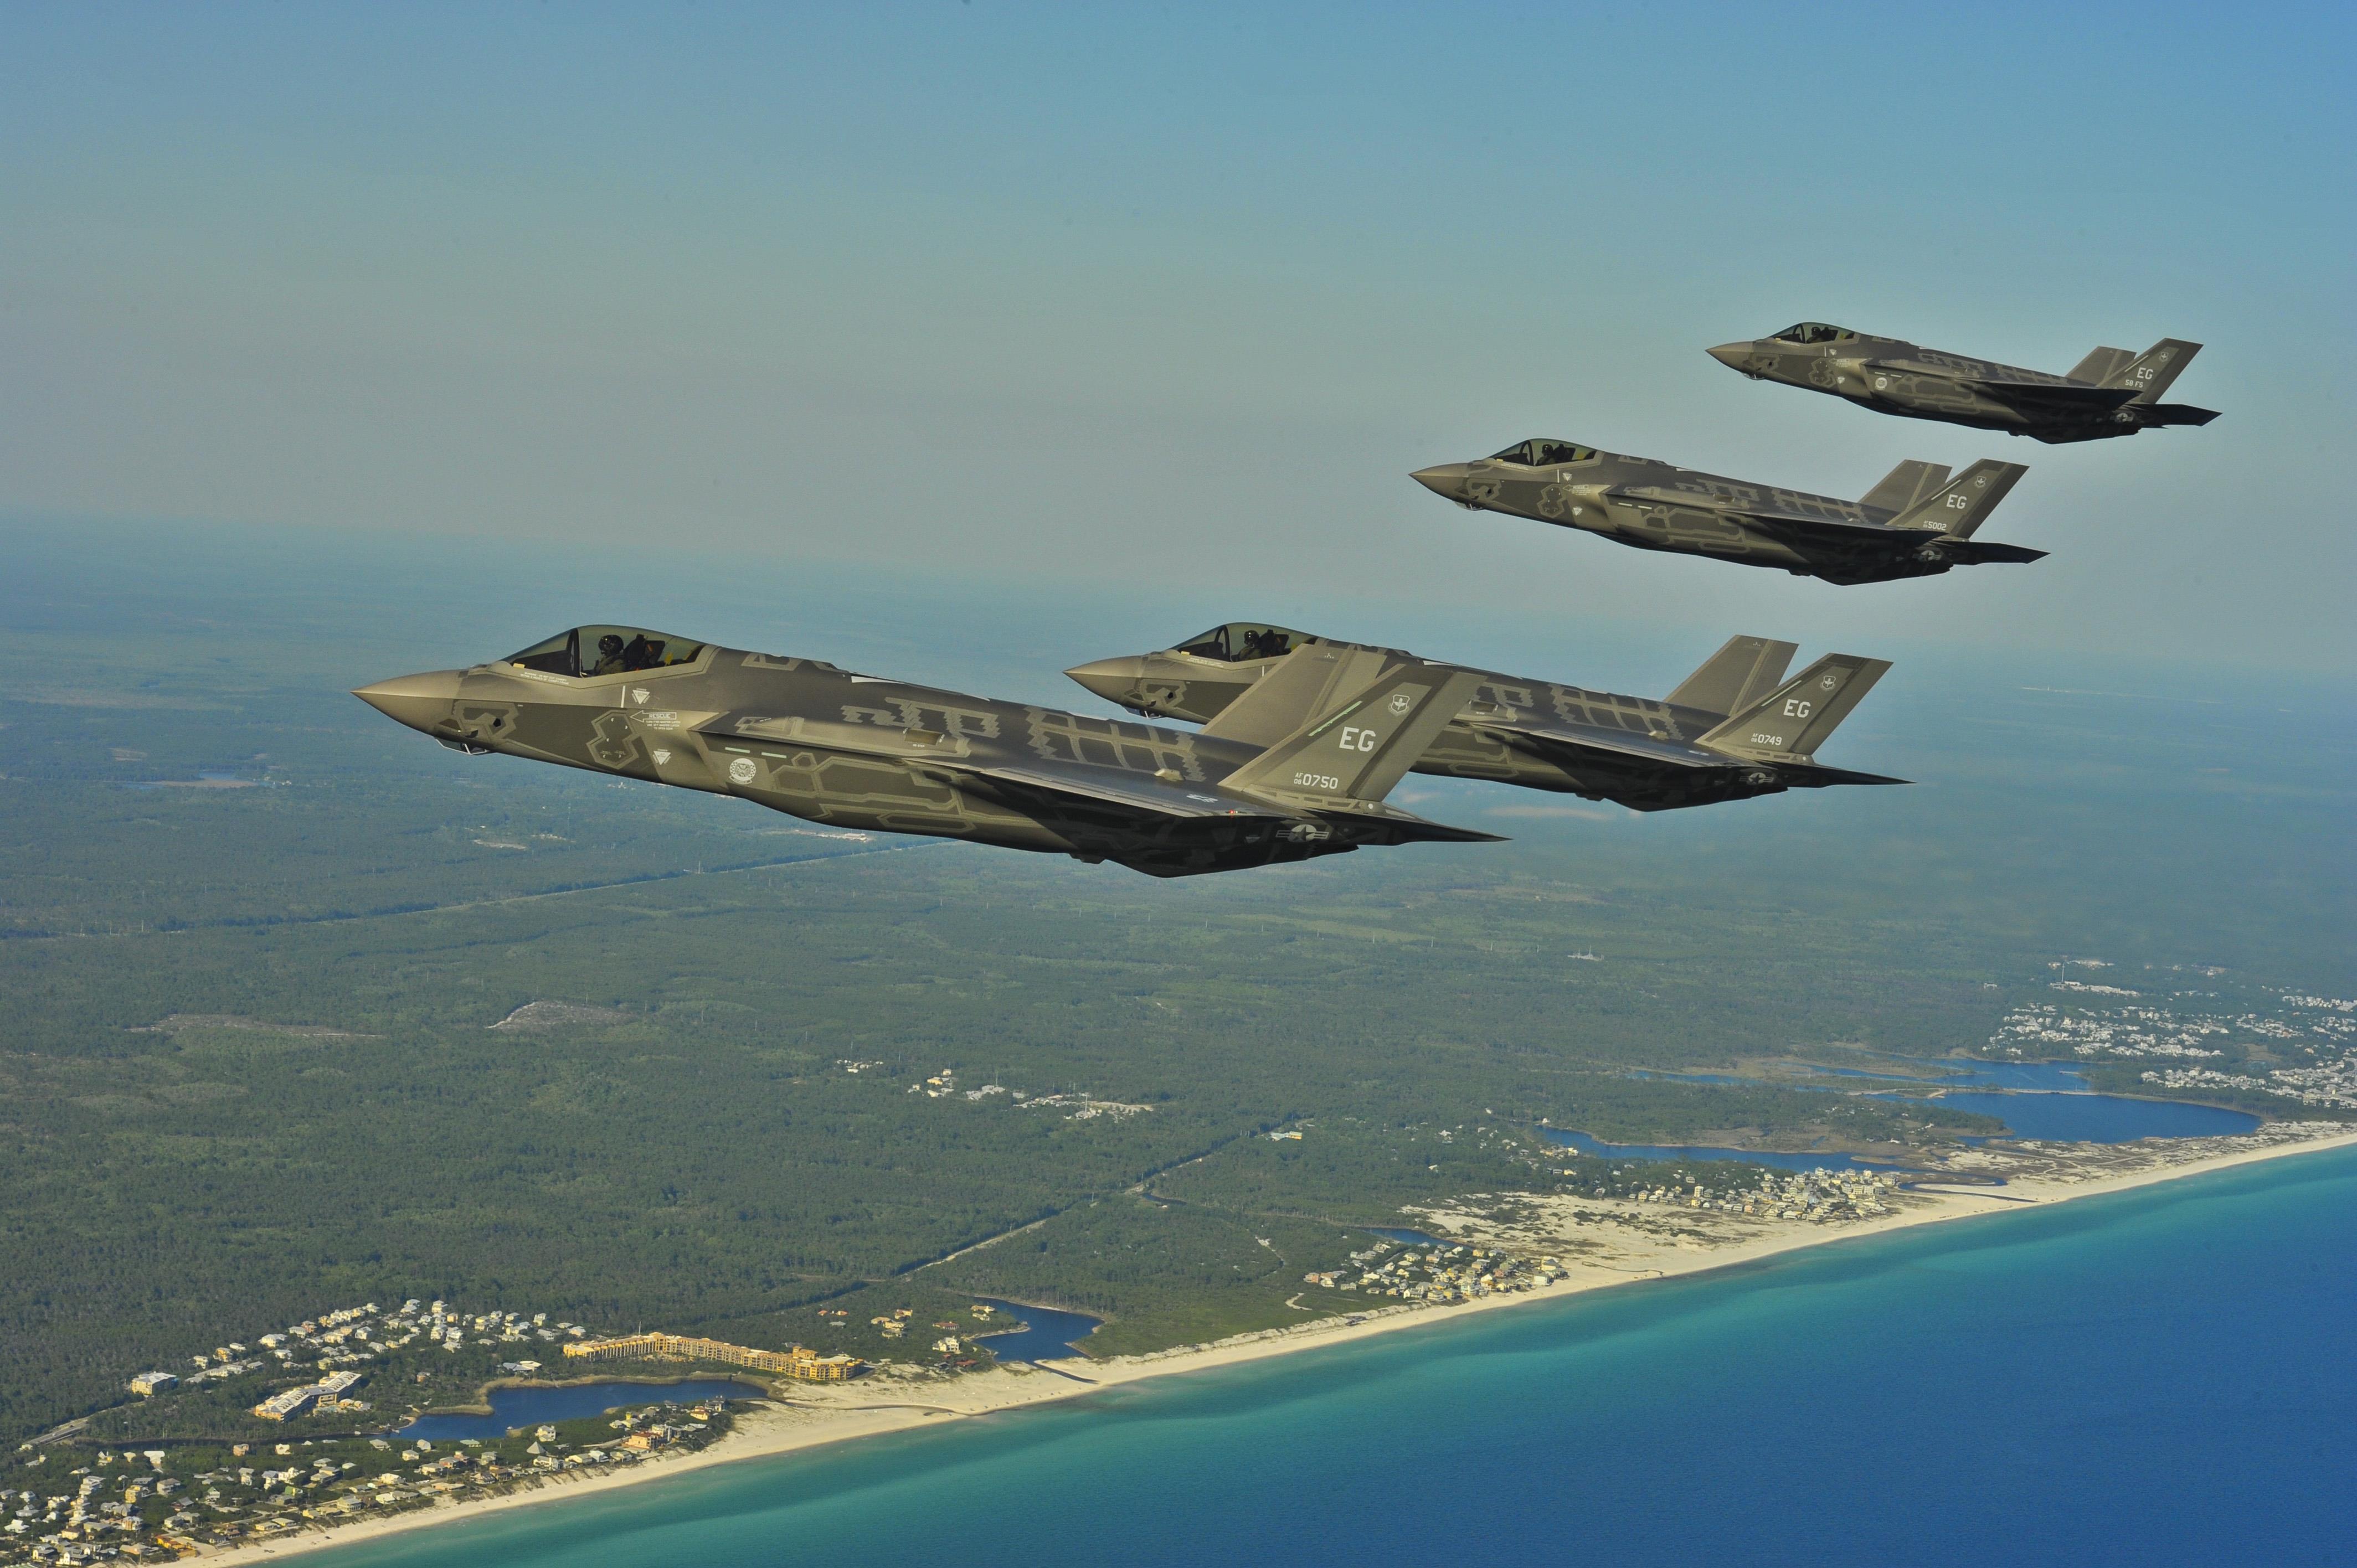 F-35A Lightning IIs from the 58th Fighter Squadron, 33rd Fighter Wing, Eglin AFB, Fla., perform an aerial refueling mission May 14, 2013, off the coast of northwest Florida. US Air Force Photo